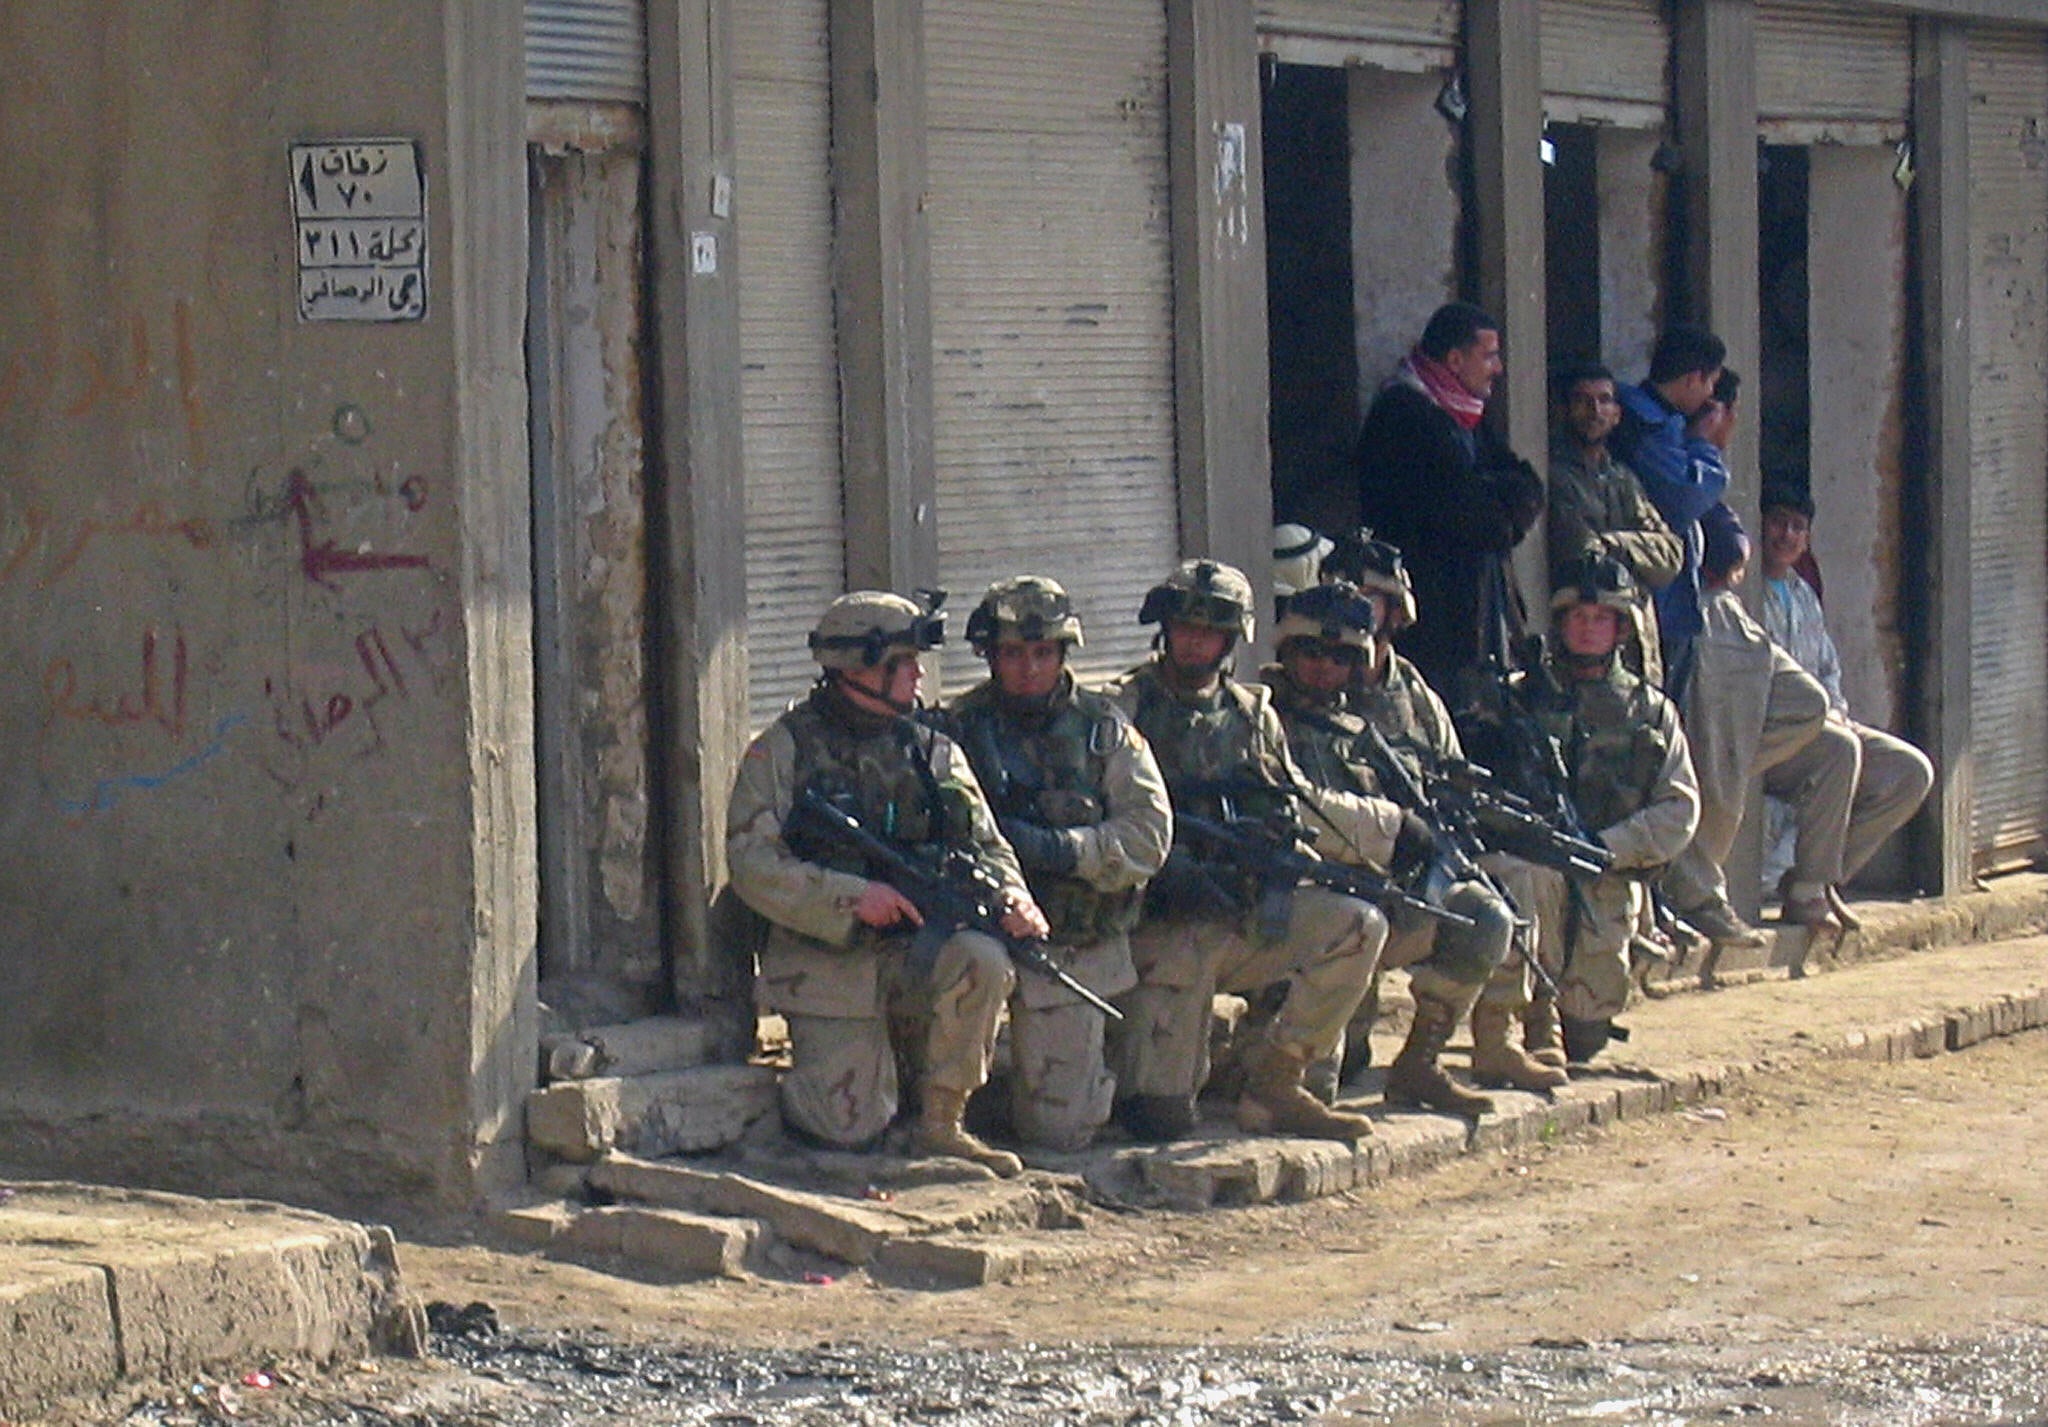 US soldiers raid a neighbourhood in the flashpoint Iraqi town of Fallujah, on 2 January 2004